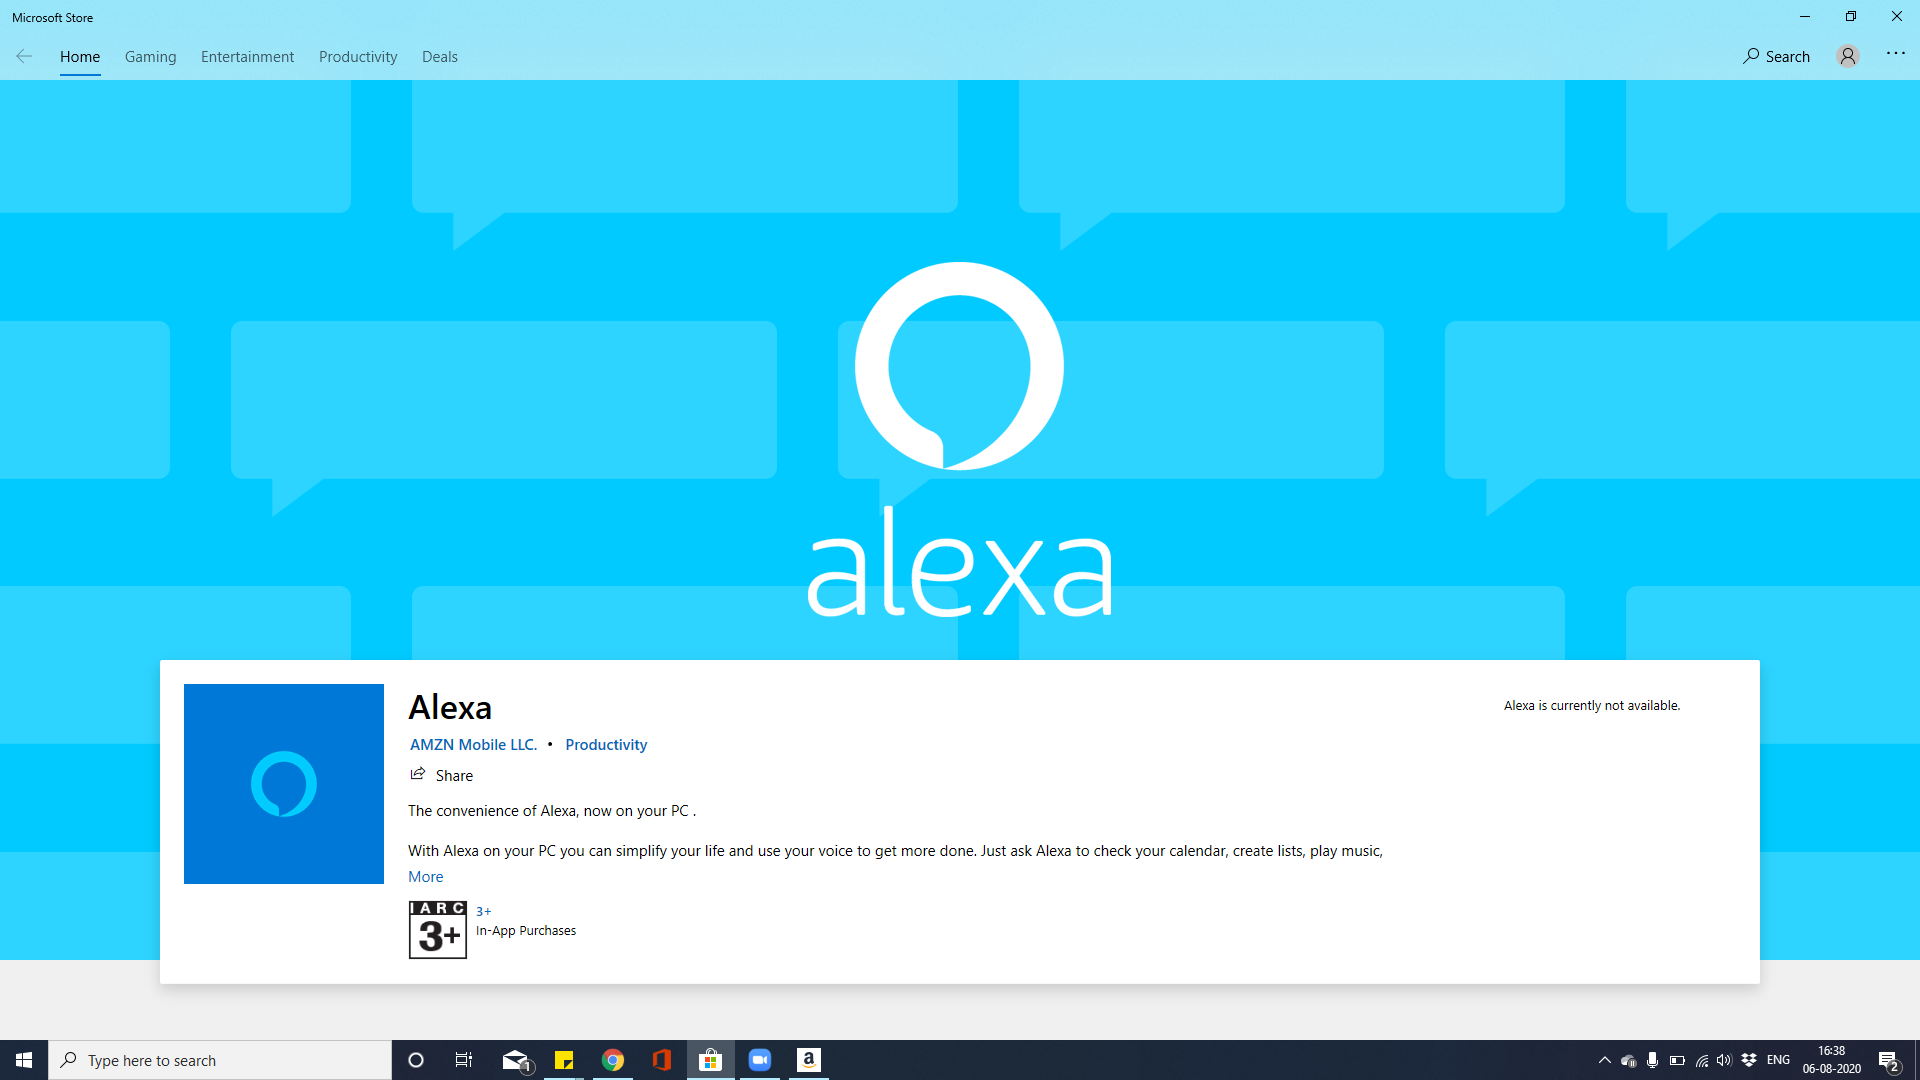 I am unable to install alexa in my PC. The Microsoft store is showing unavailability of... cacf47a6-daaa-449a-86fe-50a39773f077?upload=true.png